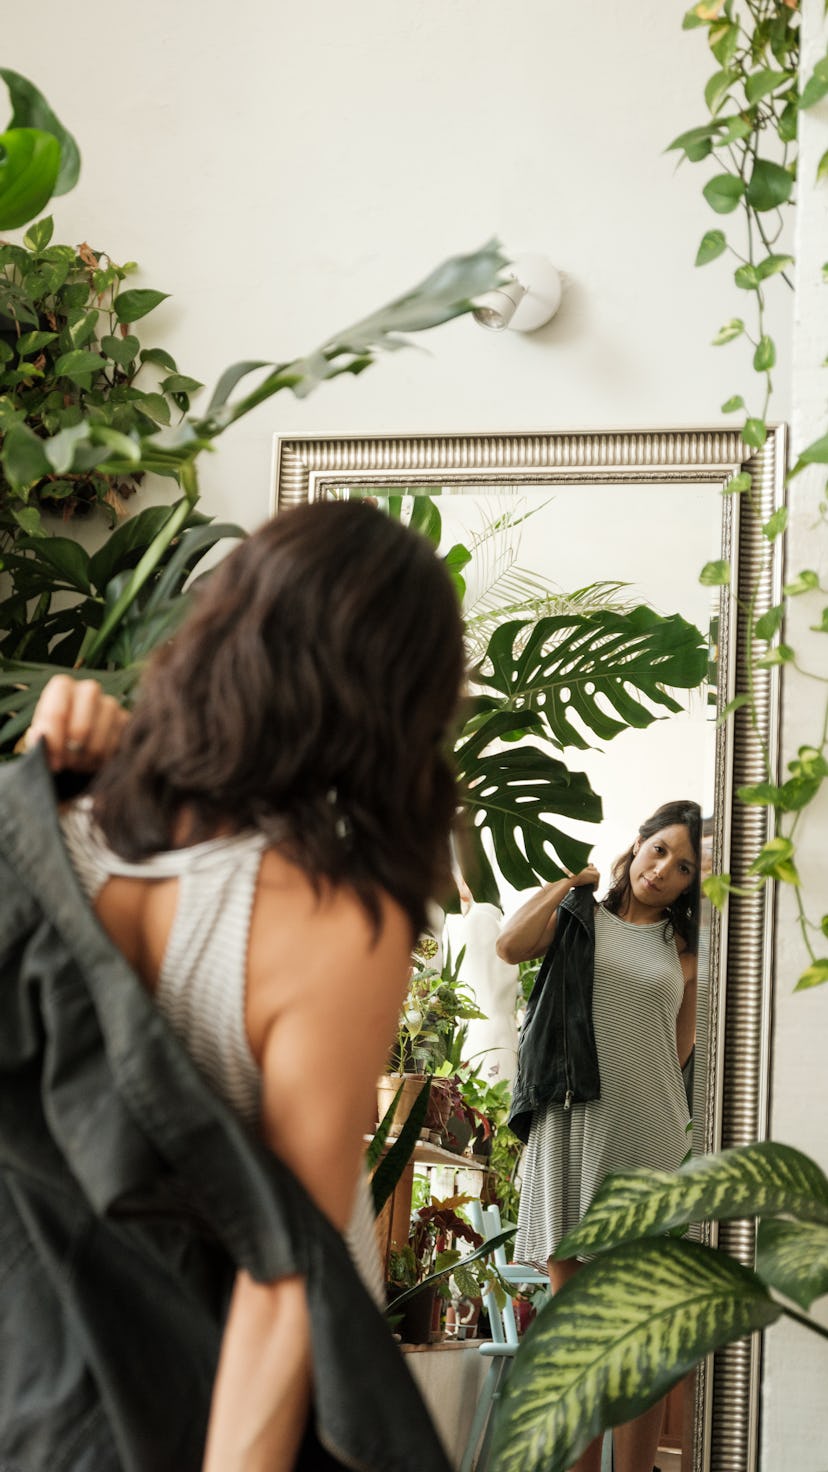 A woman standing in front of the mirror in a clothing shop trying on clothes. During the February 20...